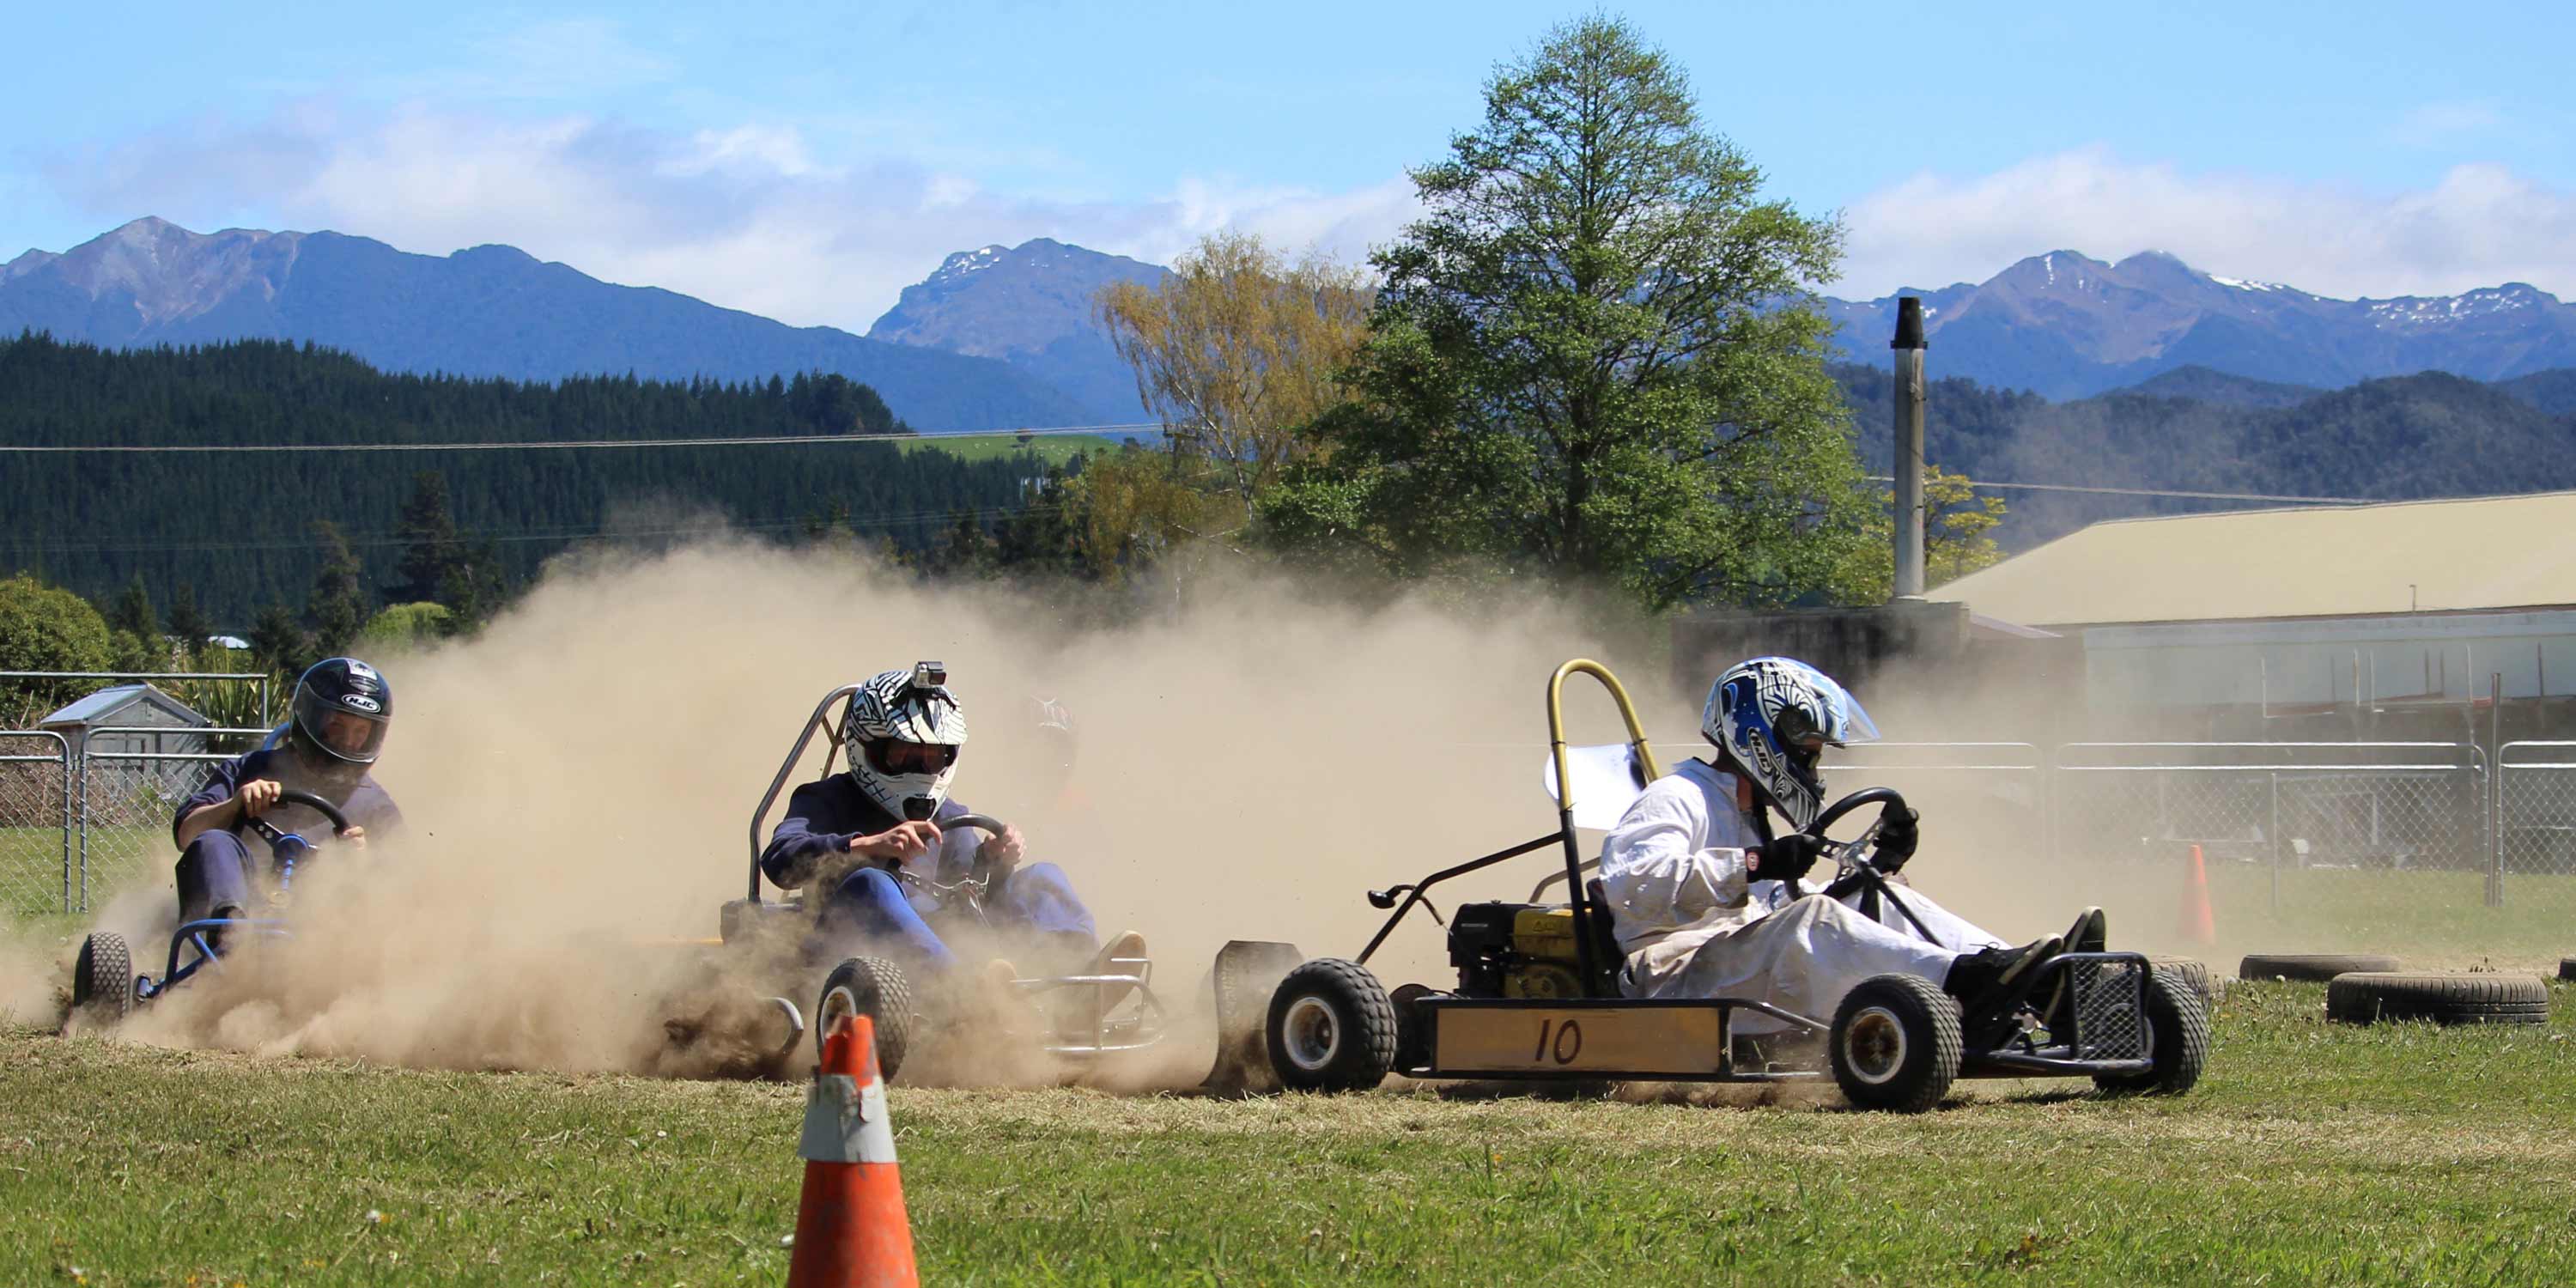 james perham followed by dillon johns and daniel batchelor nmit grass karts 2015